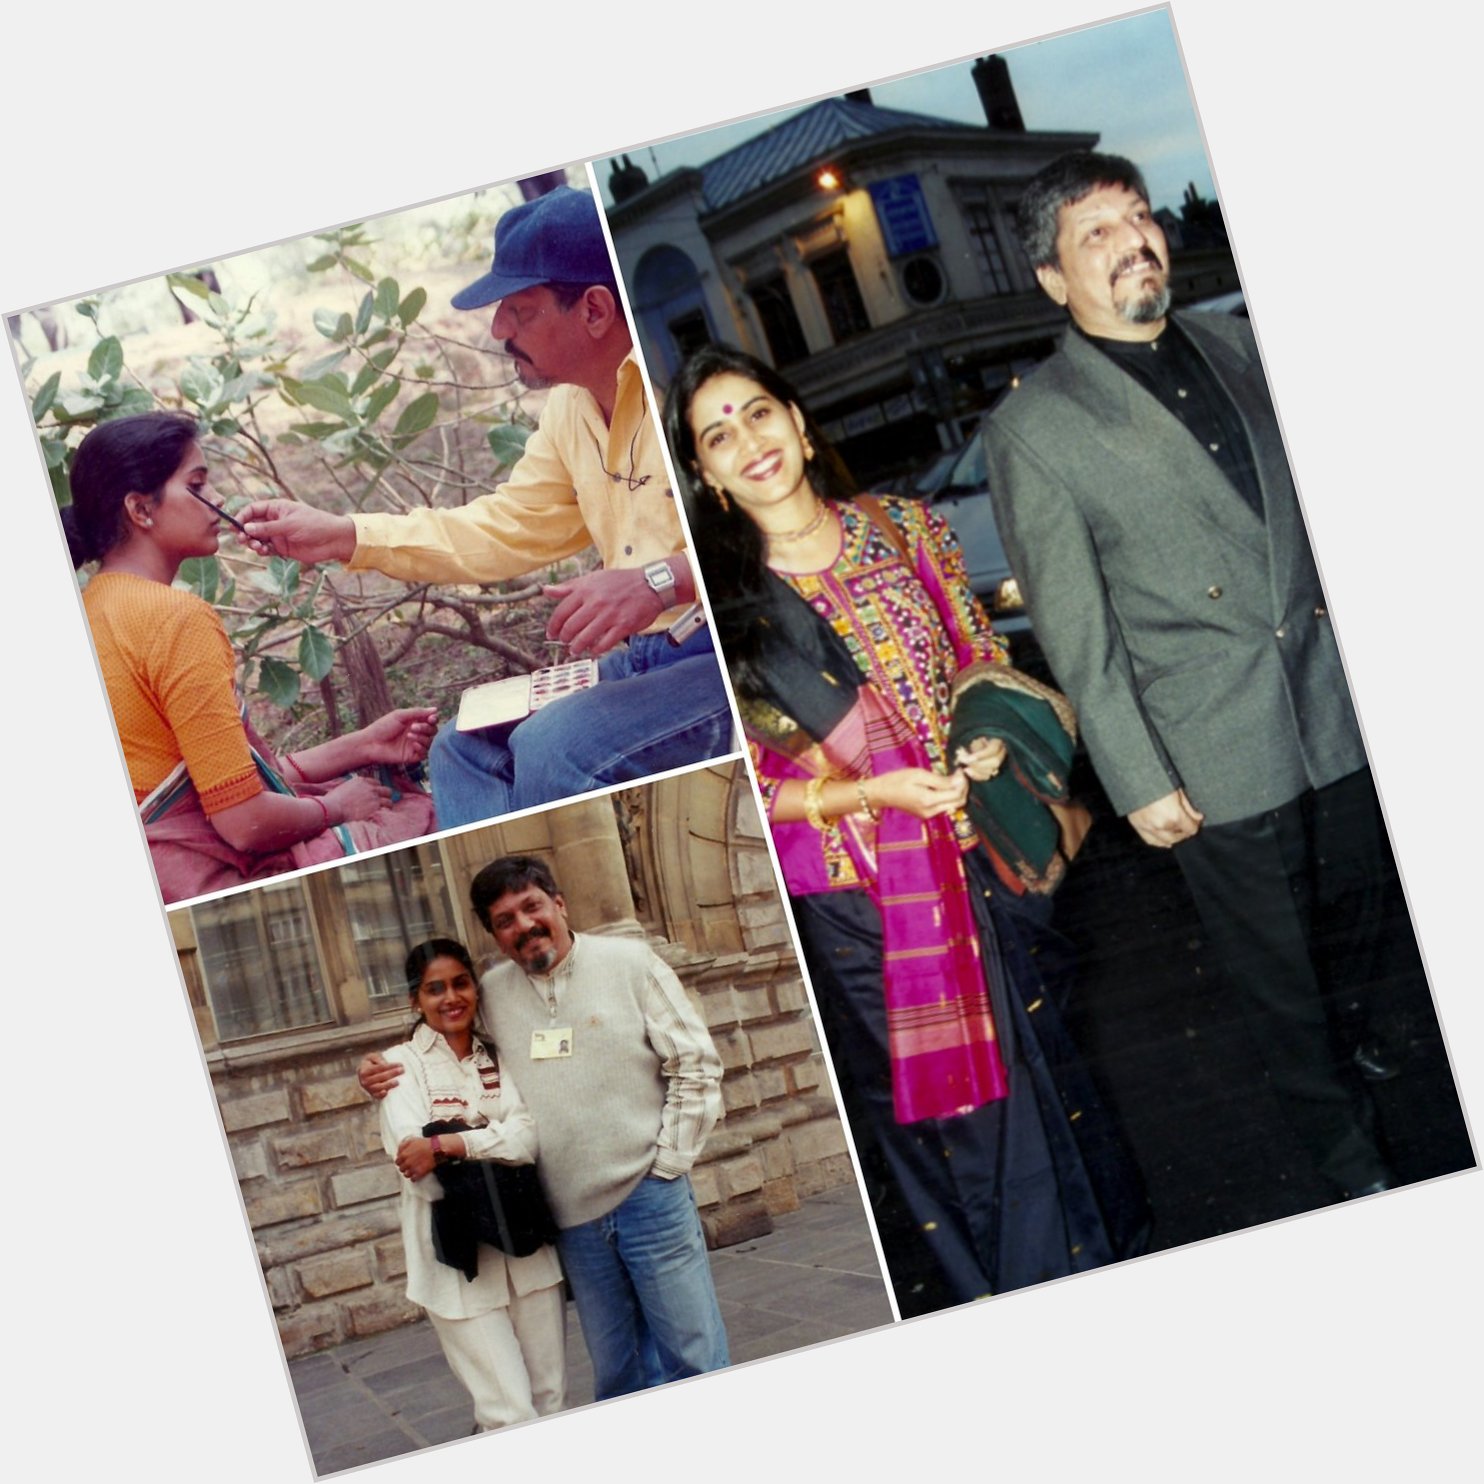 Happy Birthday Amol Palekar Miss the golden times of Daayara and Kairee.I will await another one! Much love  